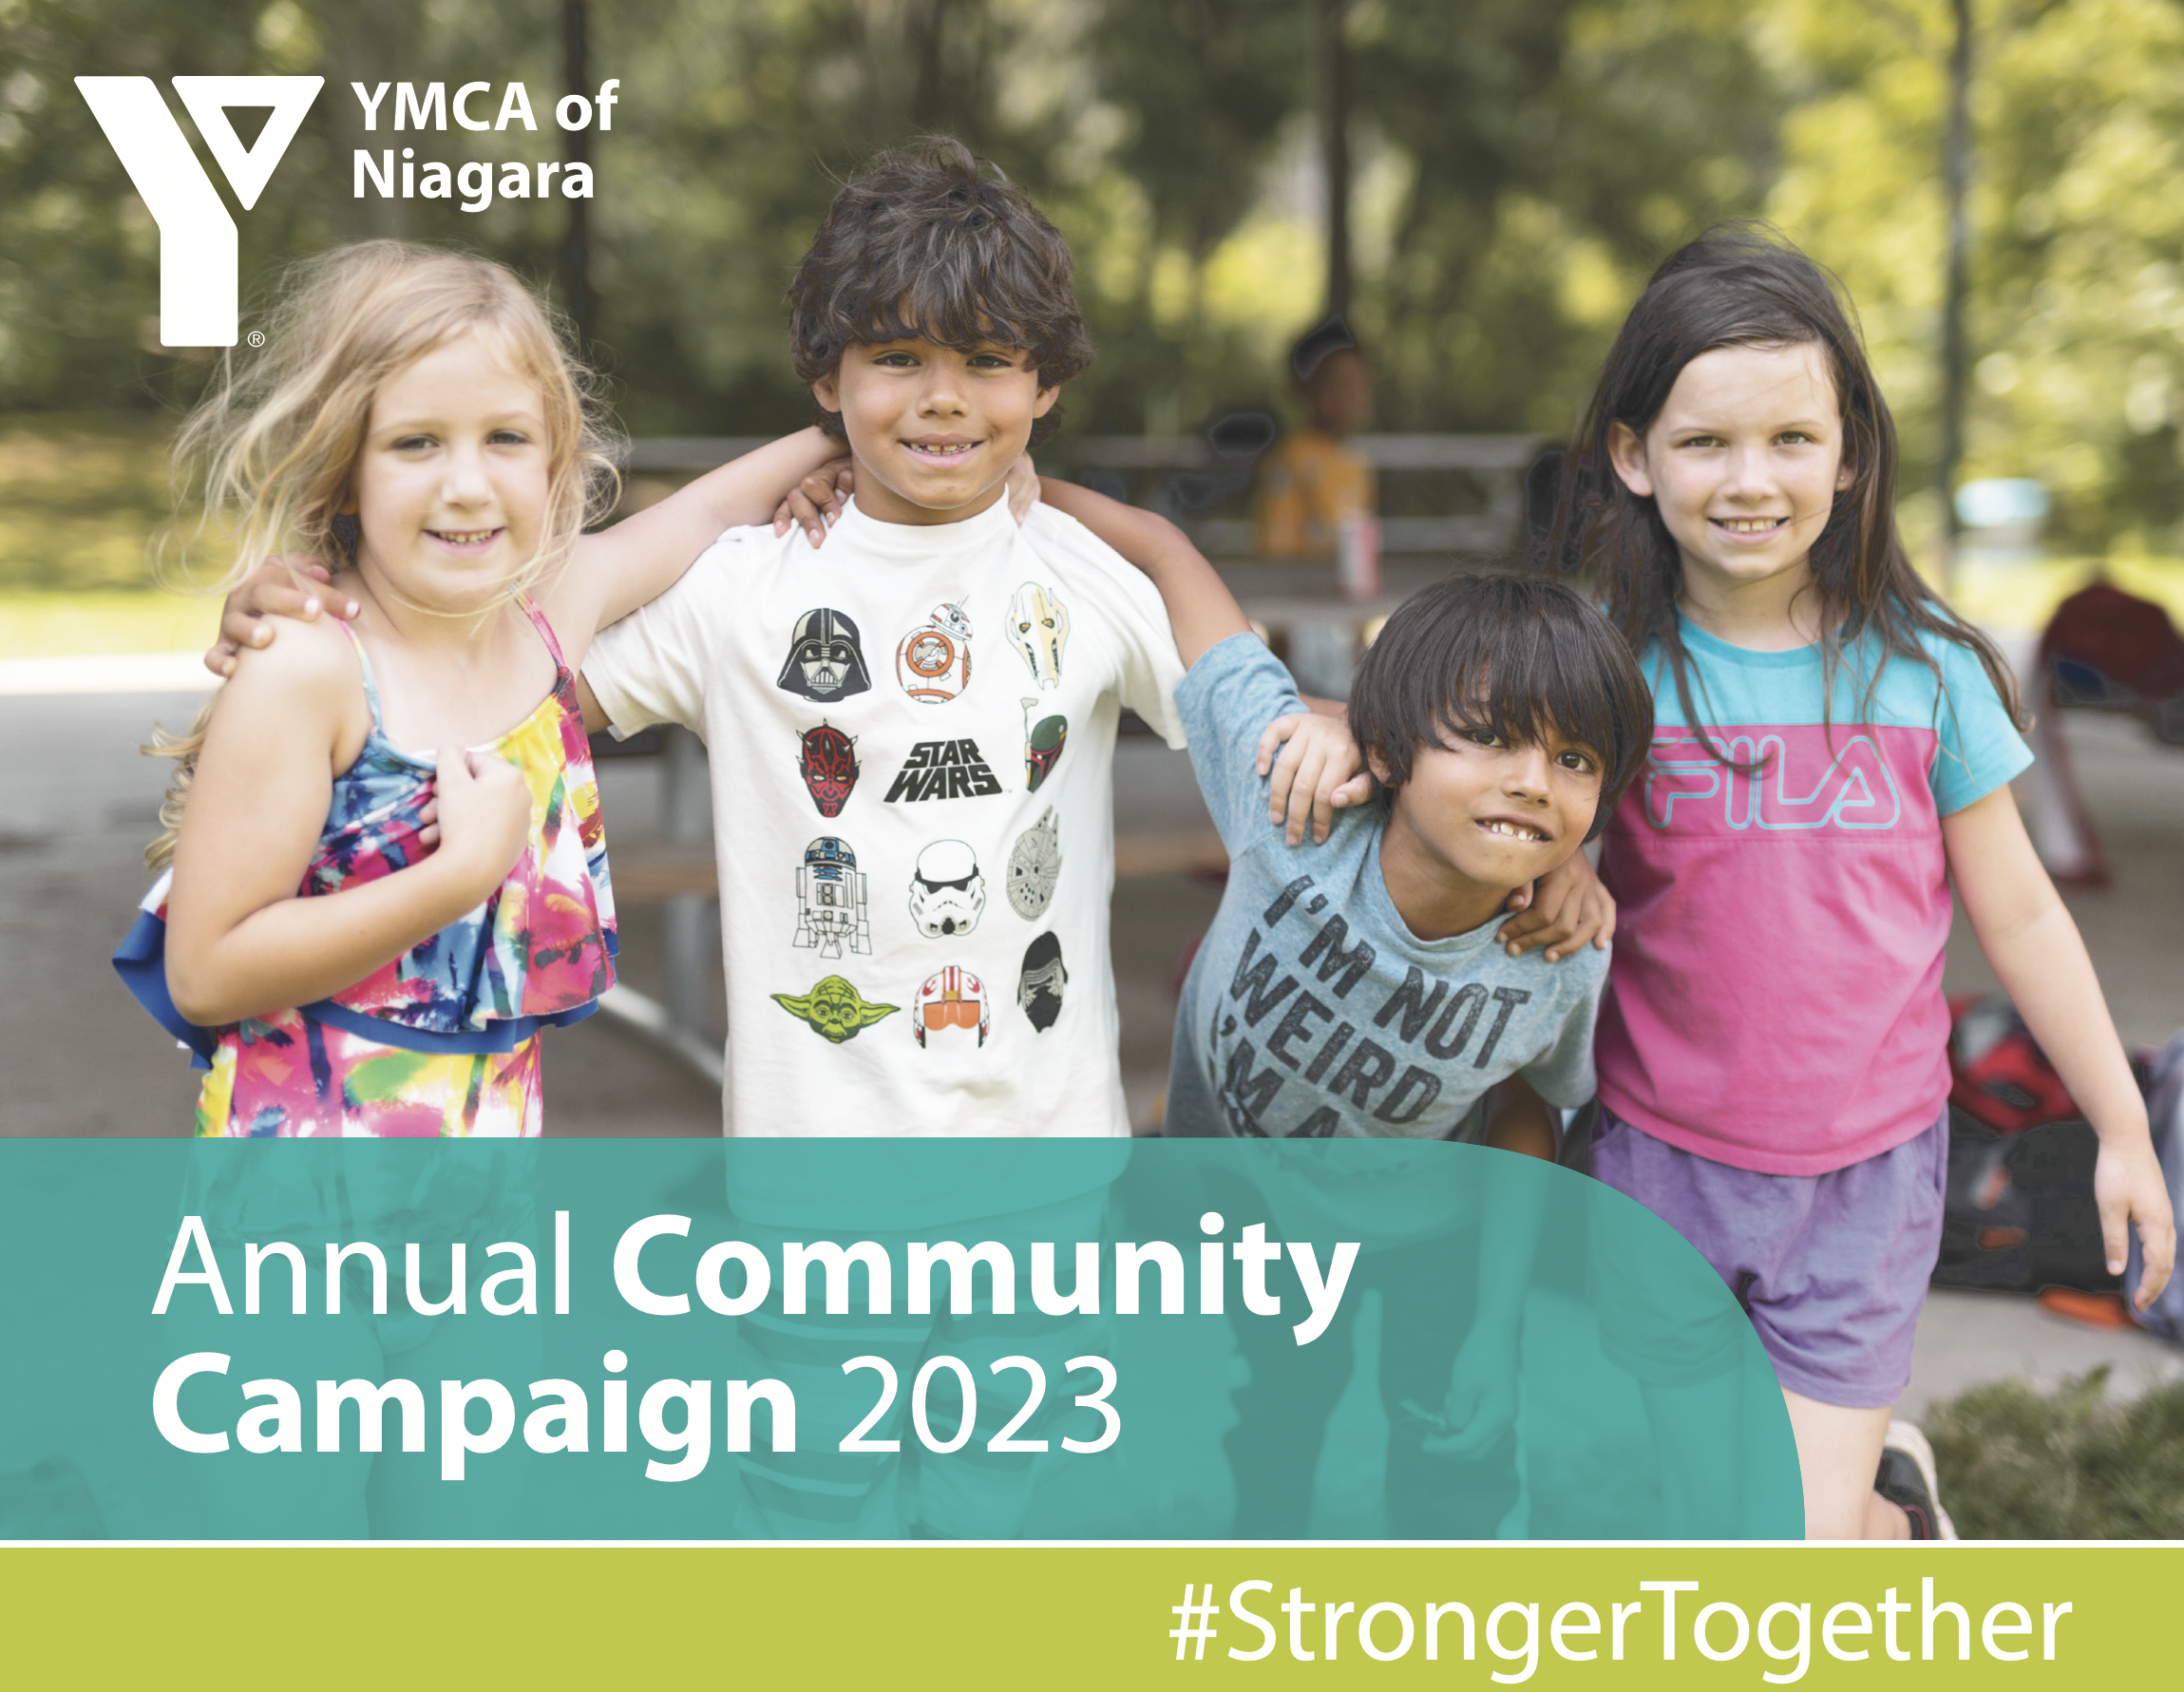 Give a Little, Help a Lot Campaign Returns to Support YMCA of Niagara for 15th Year